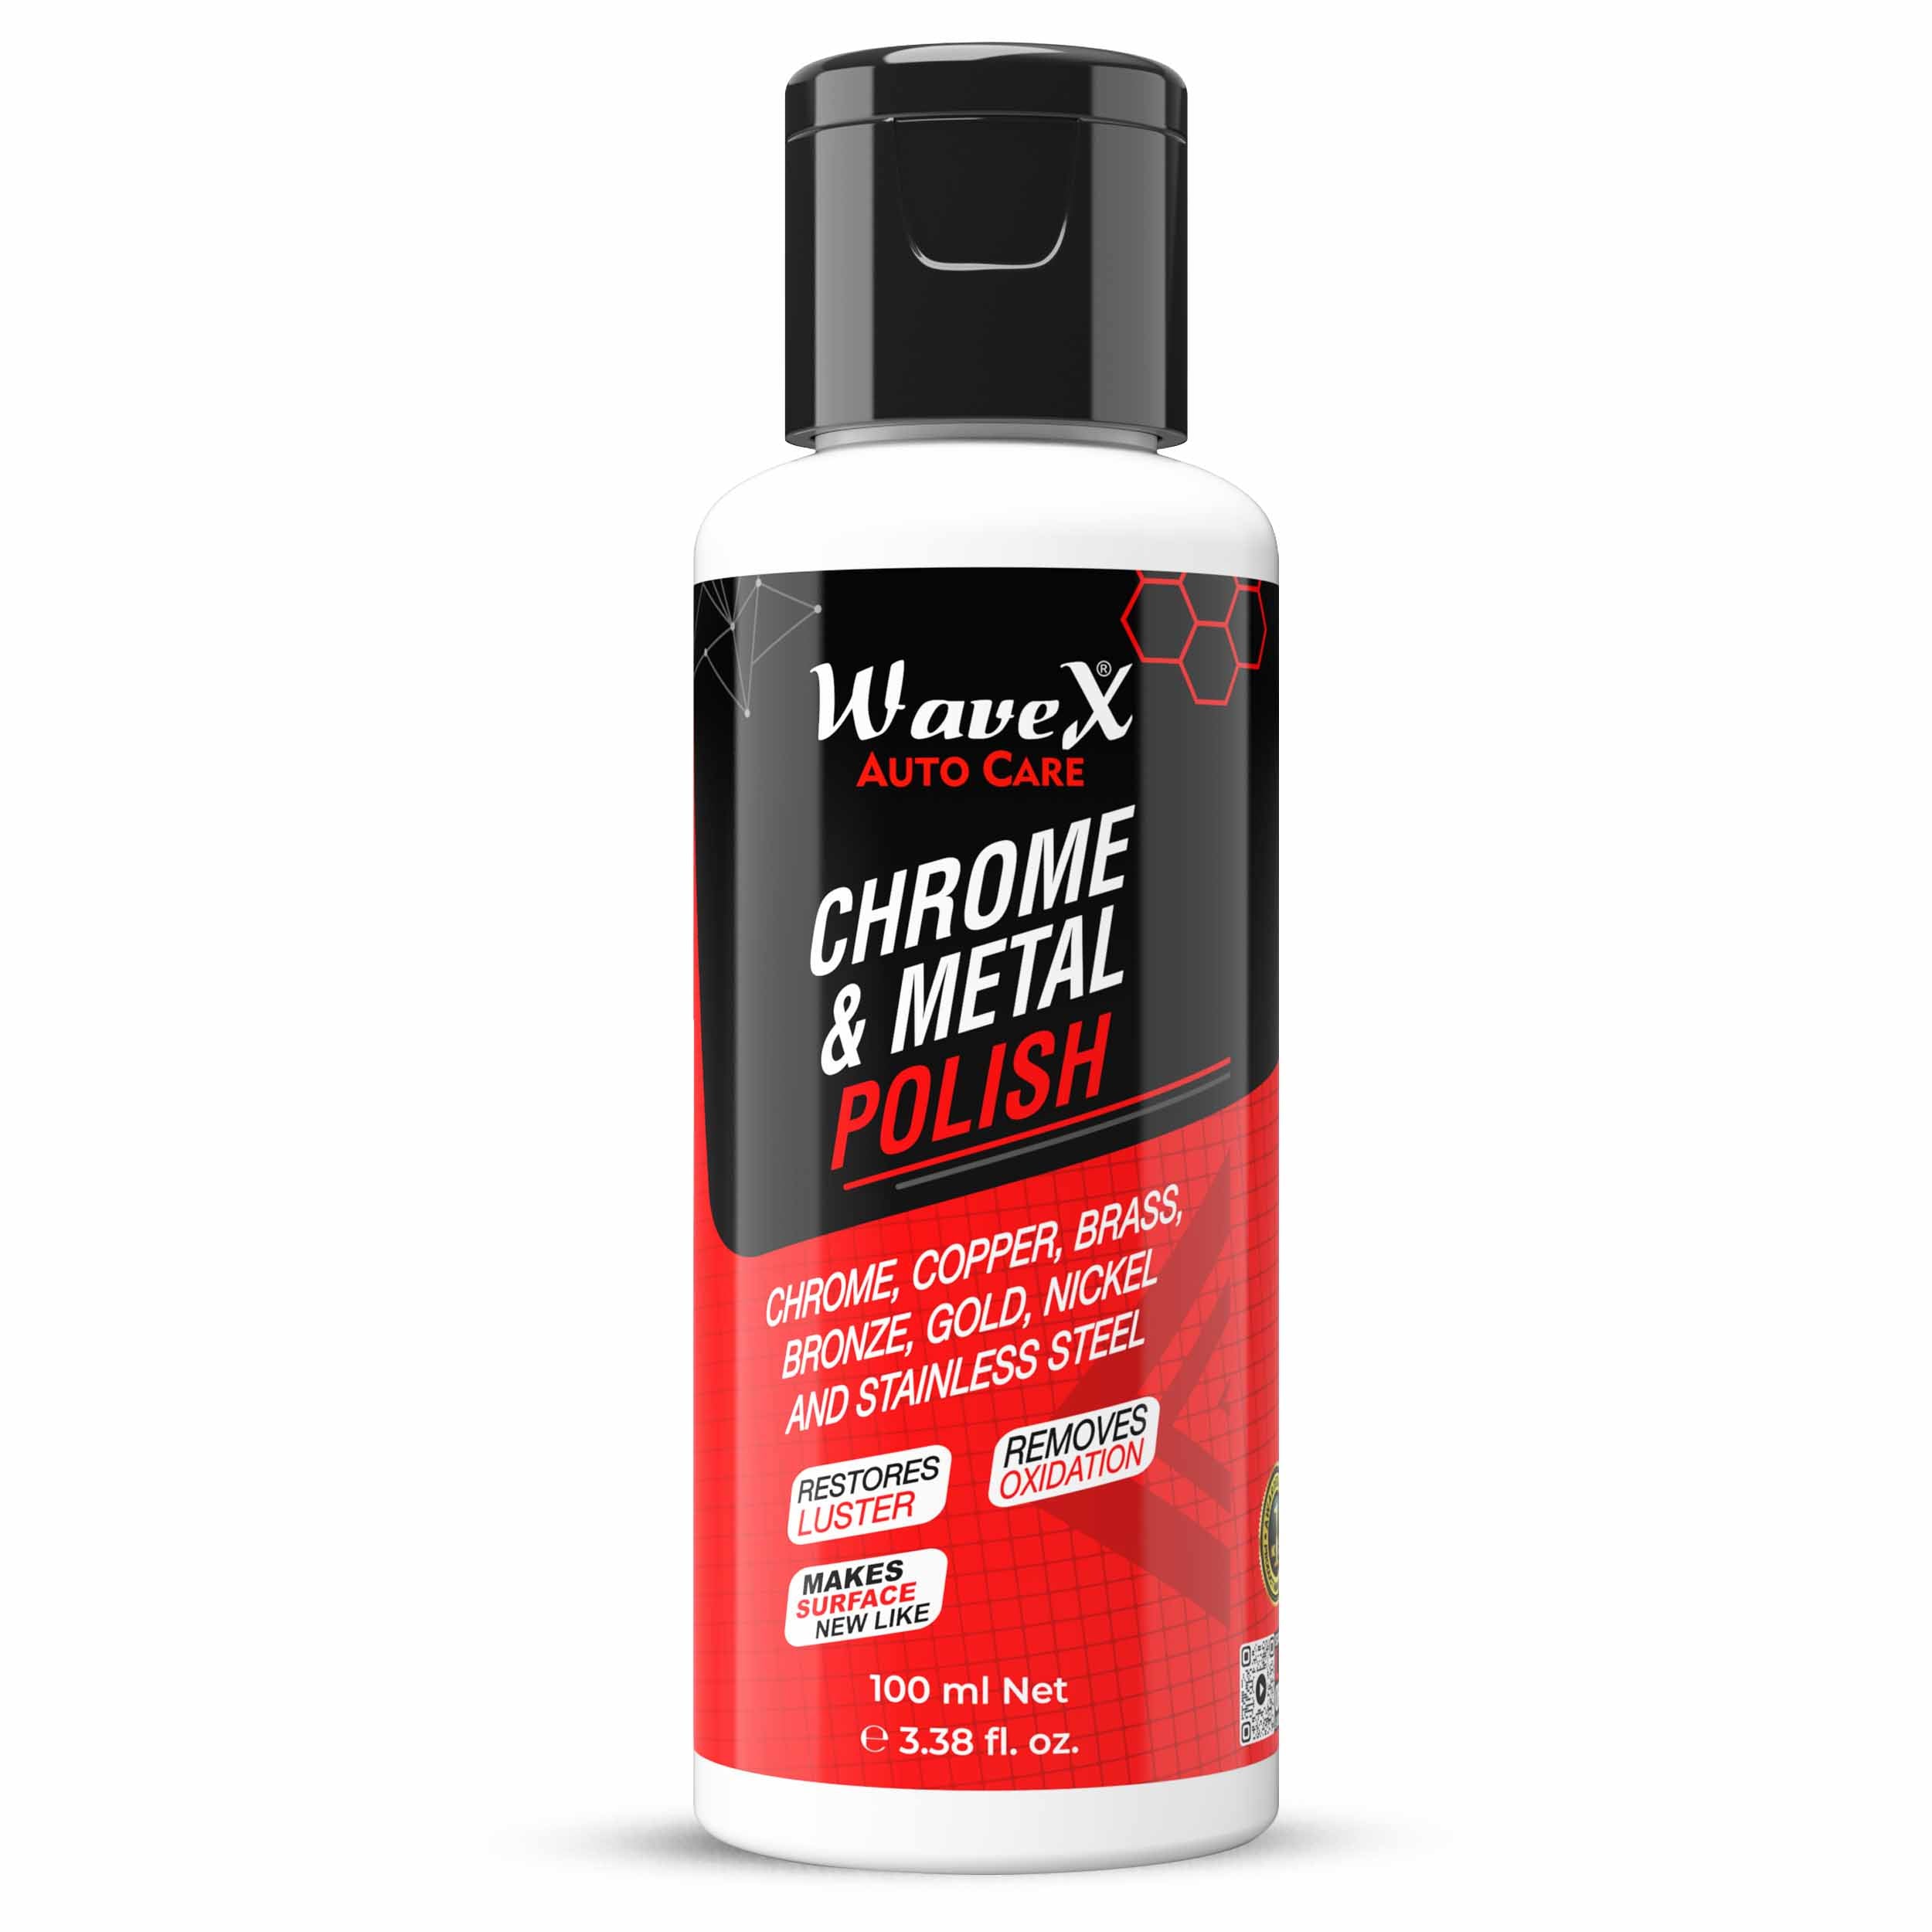 Matte Finish Maintainer 350 ml Combo, Wash, Clean, Protect and Maintain Matte Bikes and Cars, Consists of WaveX Matte Wash Shampoo, Matte Finish Maintainer, Microfiber Cloth & Chrome & Metal Polish 100ml